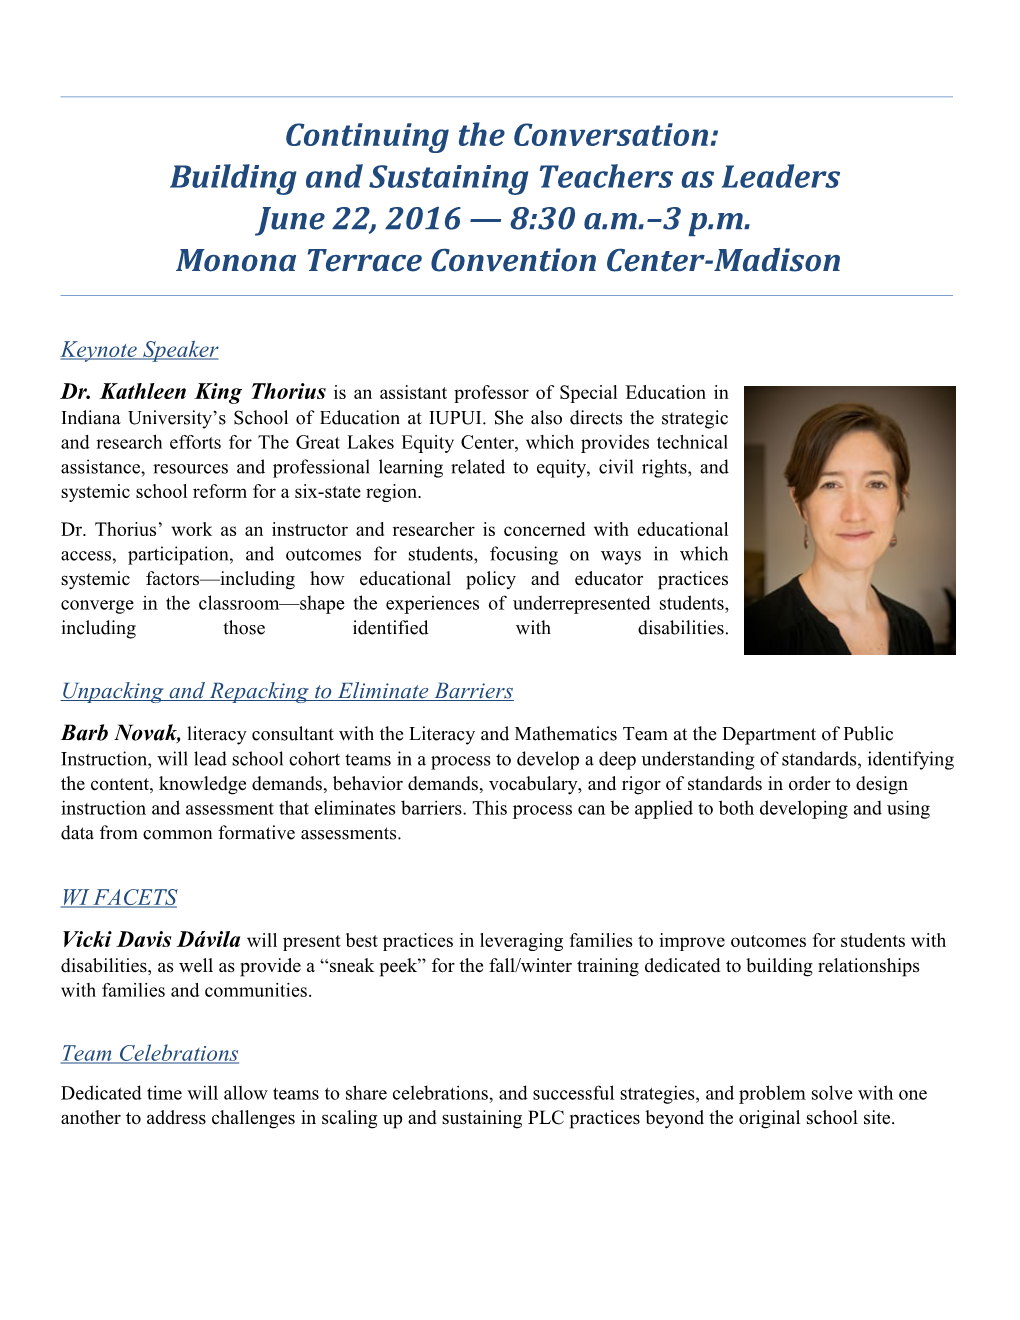 Building and Sustaining Teachers As Leaders